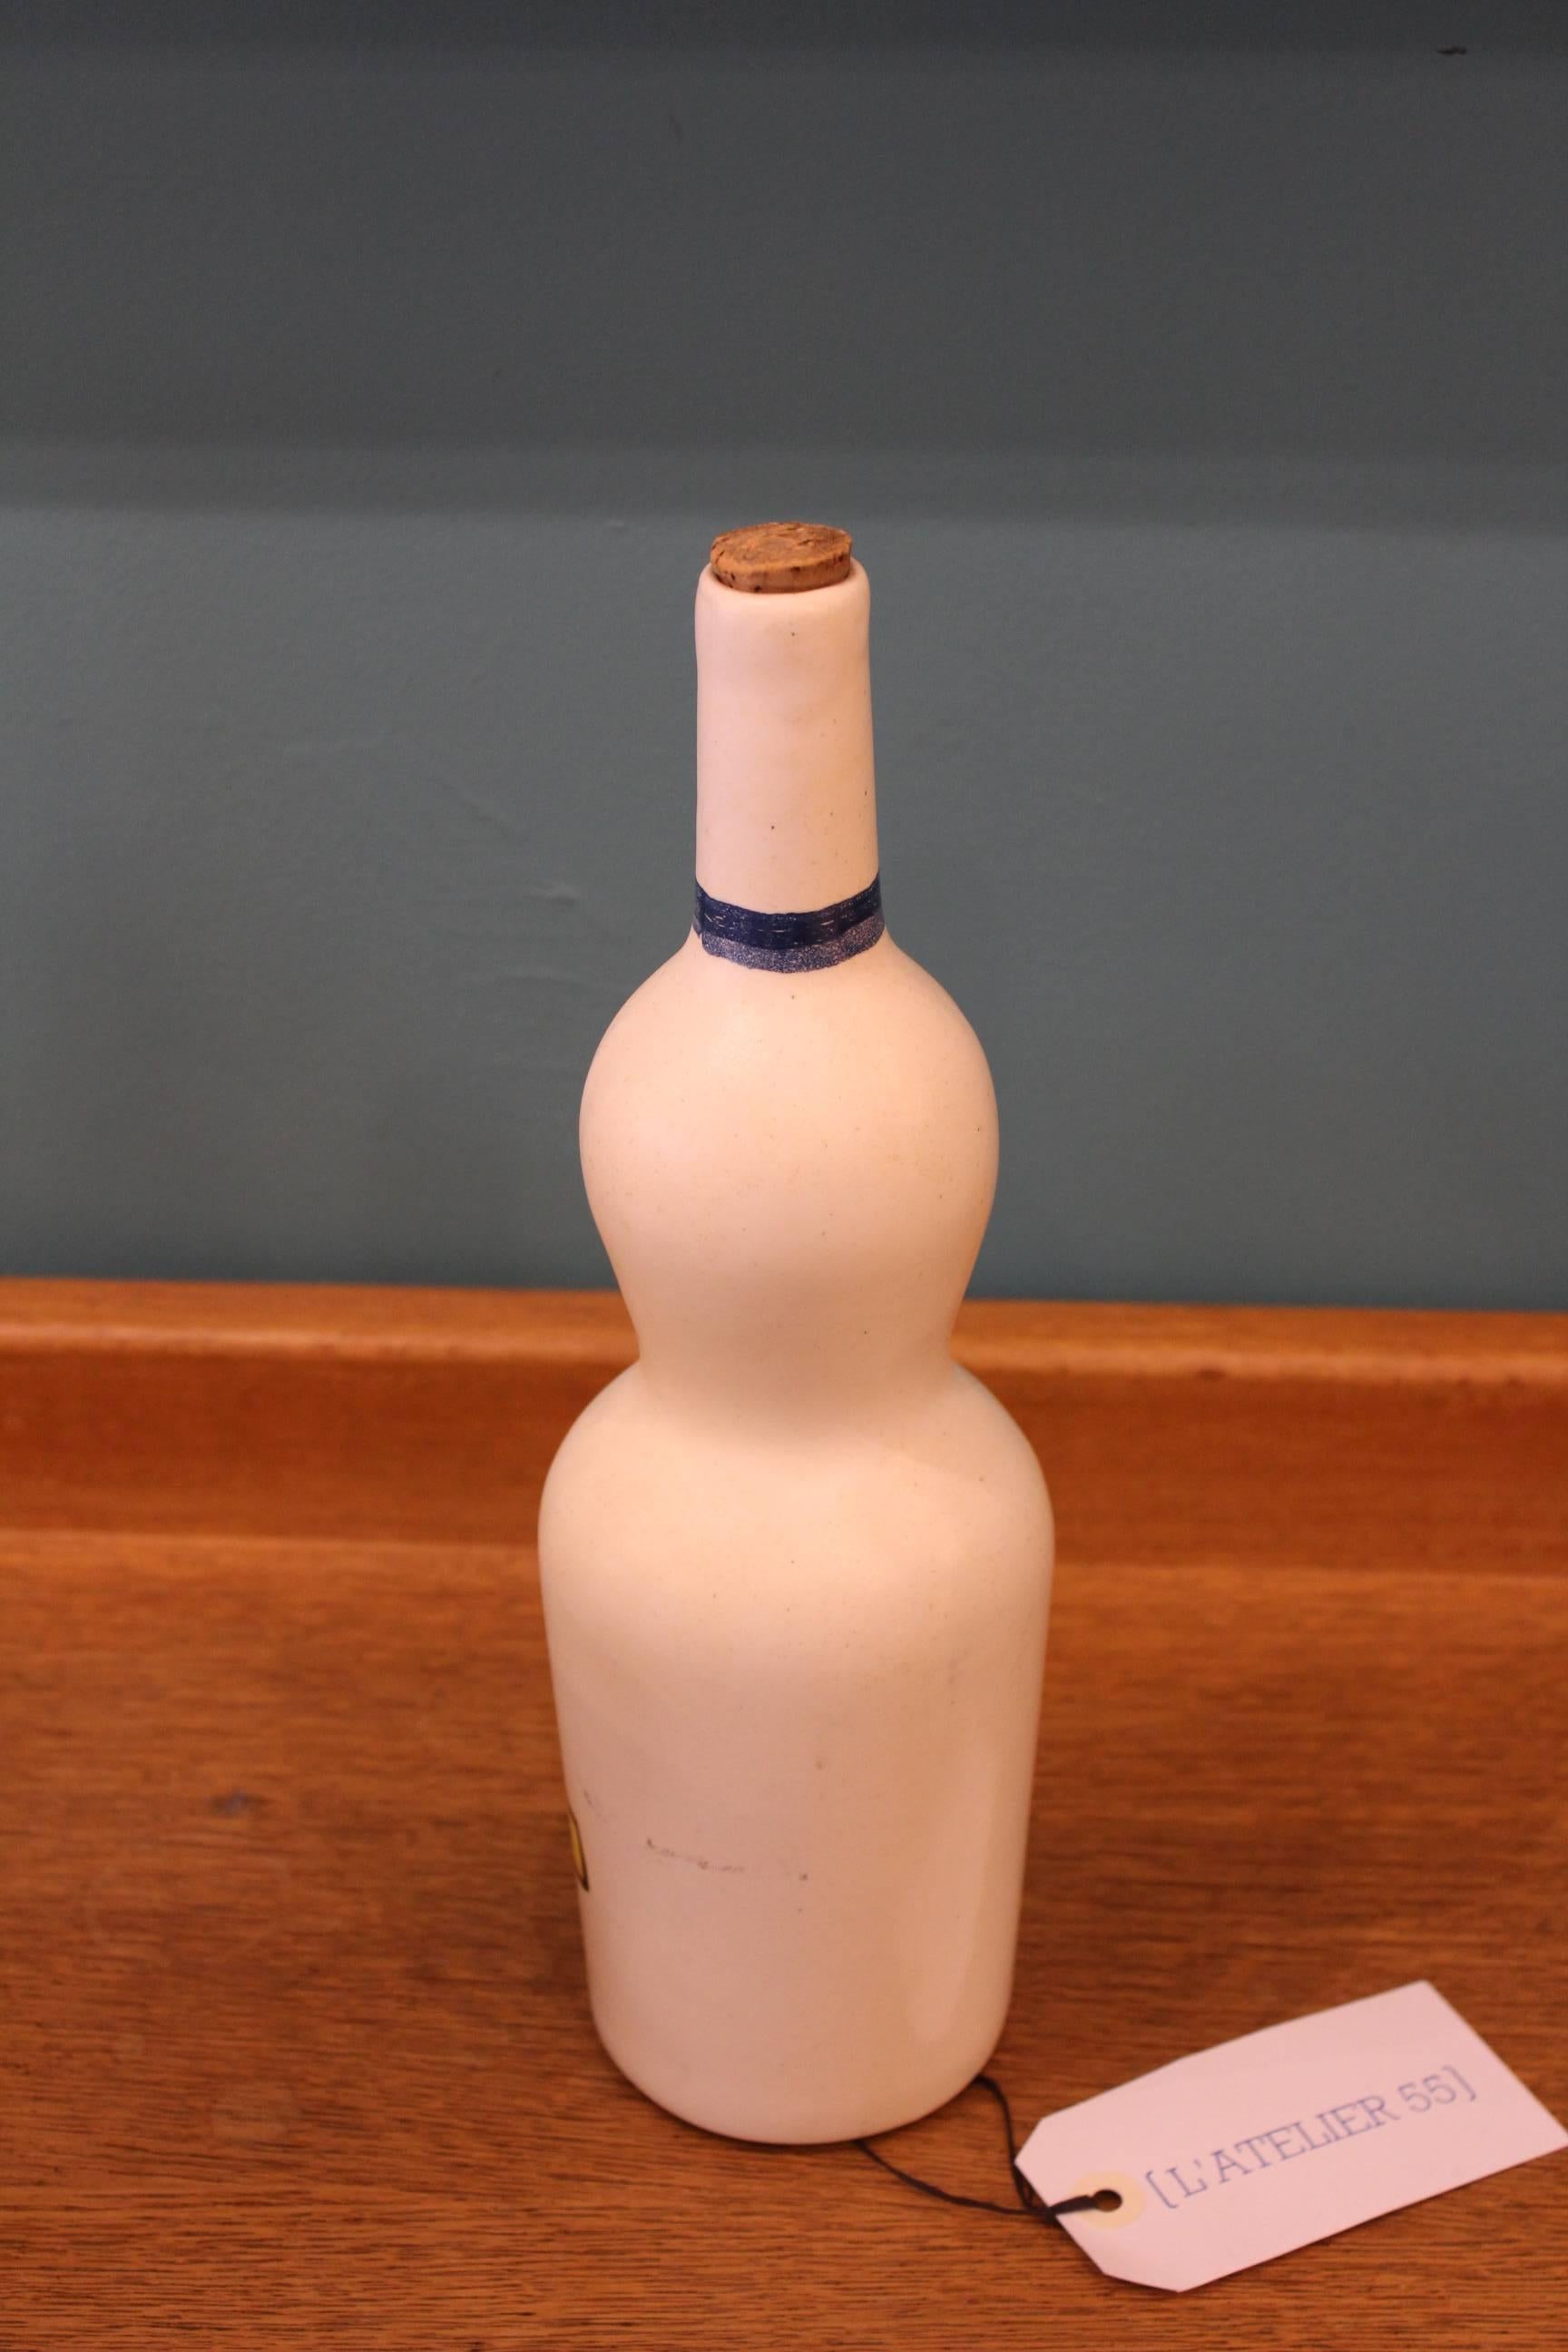 Roger Capron beautiful ceramic whisky bottle circa 1960, signed,
in excellent condition.